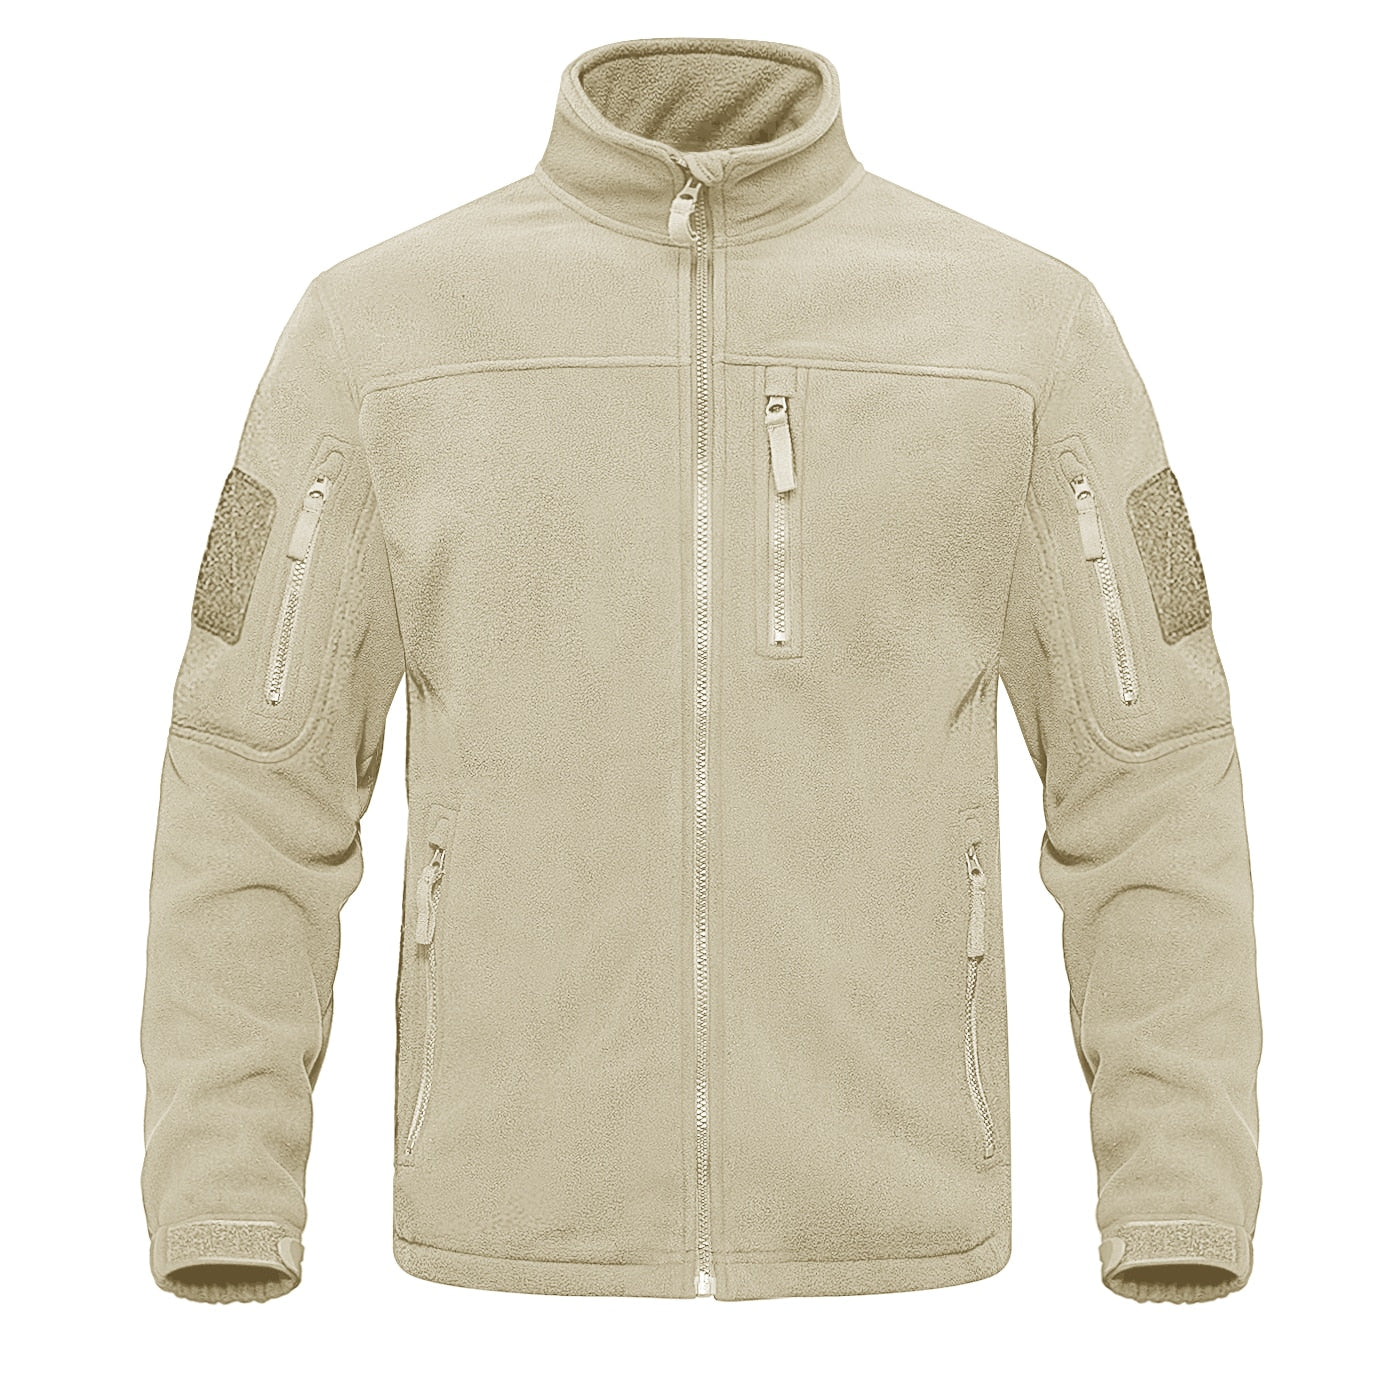 Men's Tactical Army Fleece Military Jacket in light sand